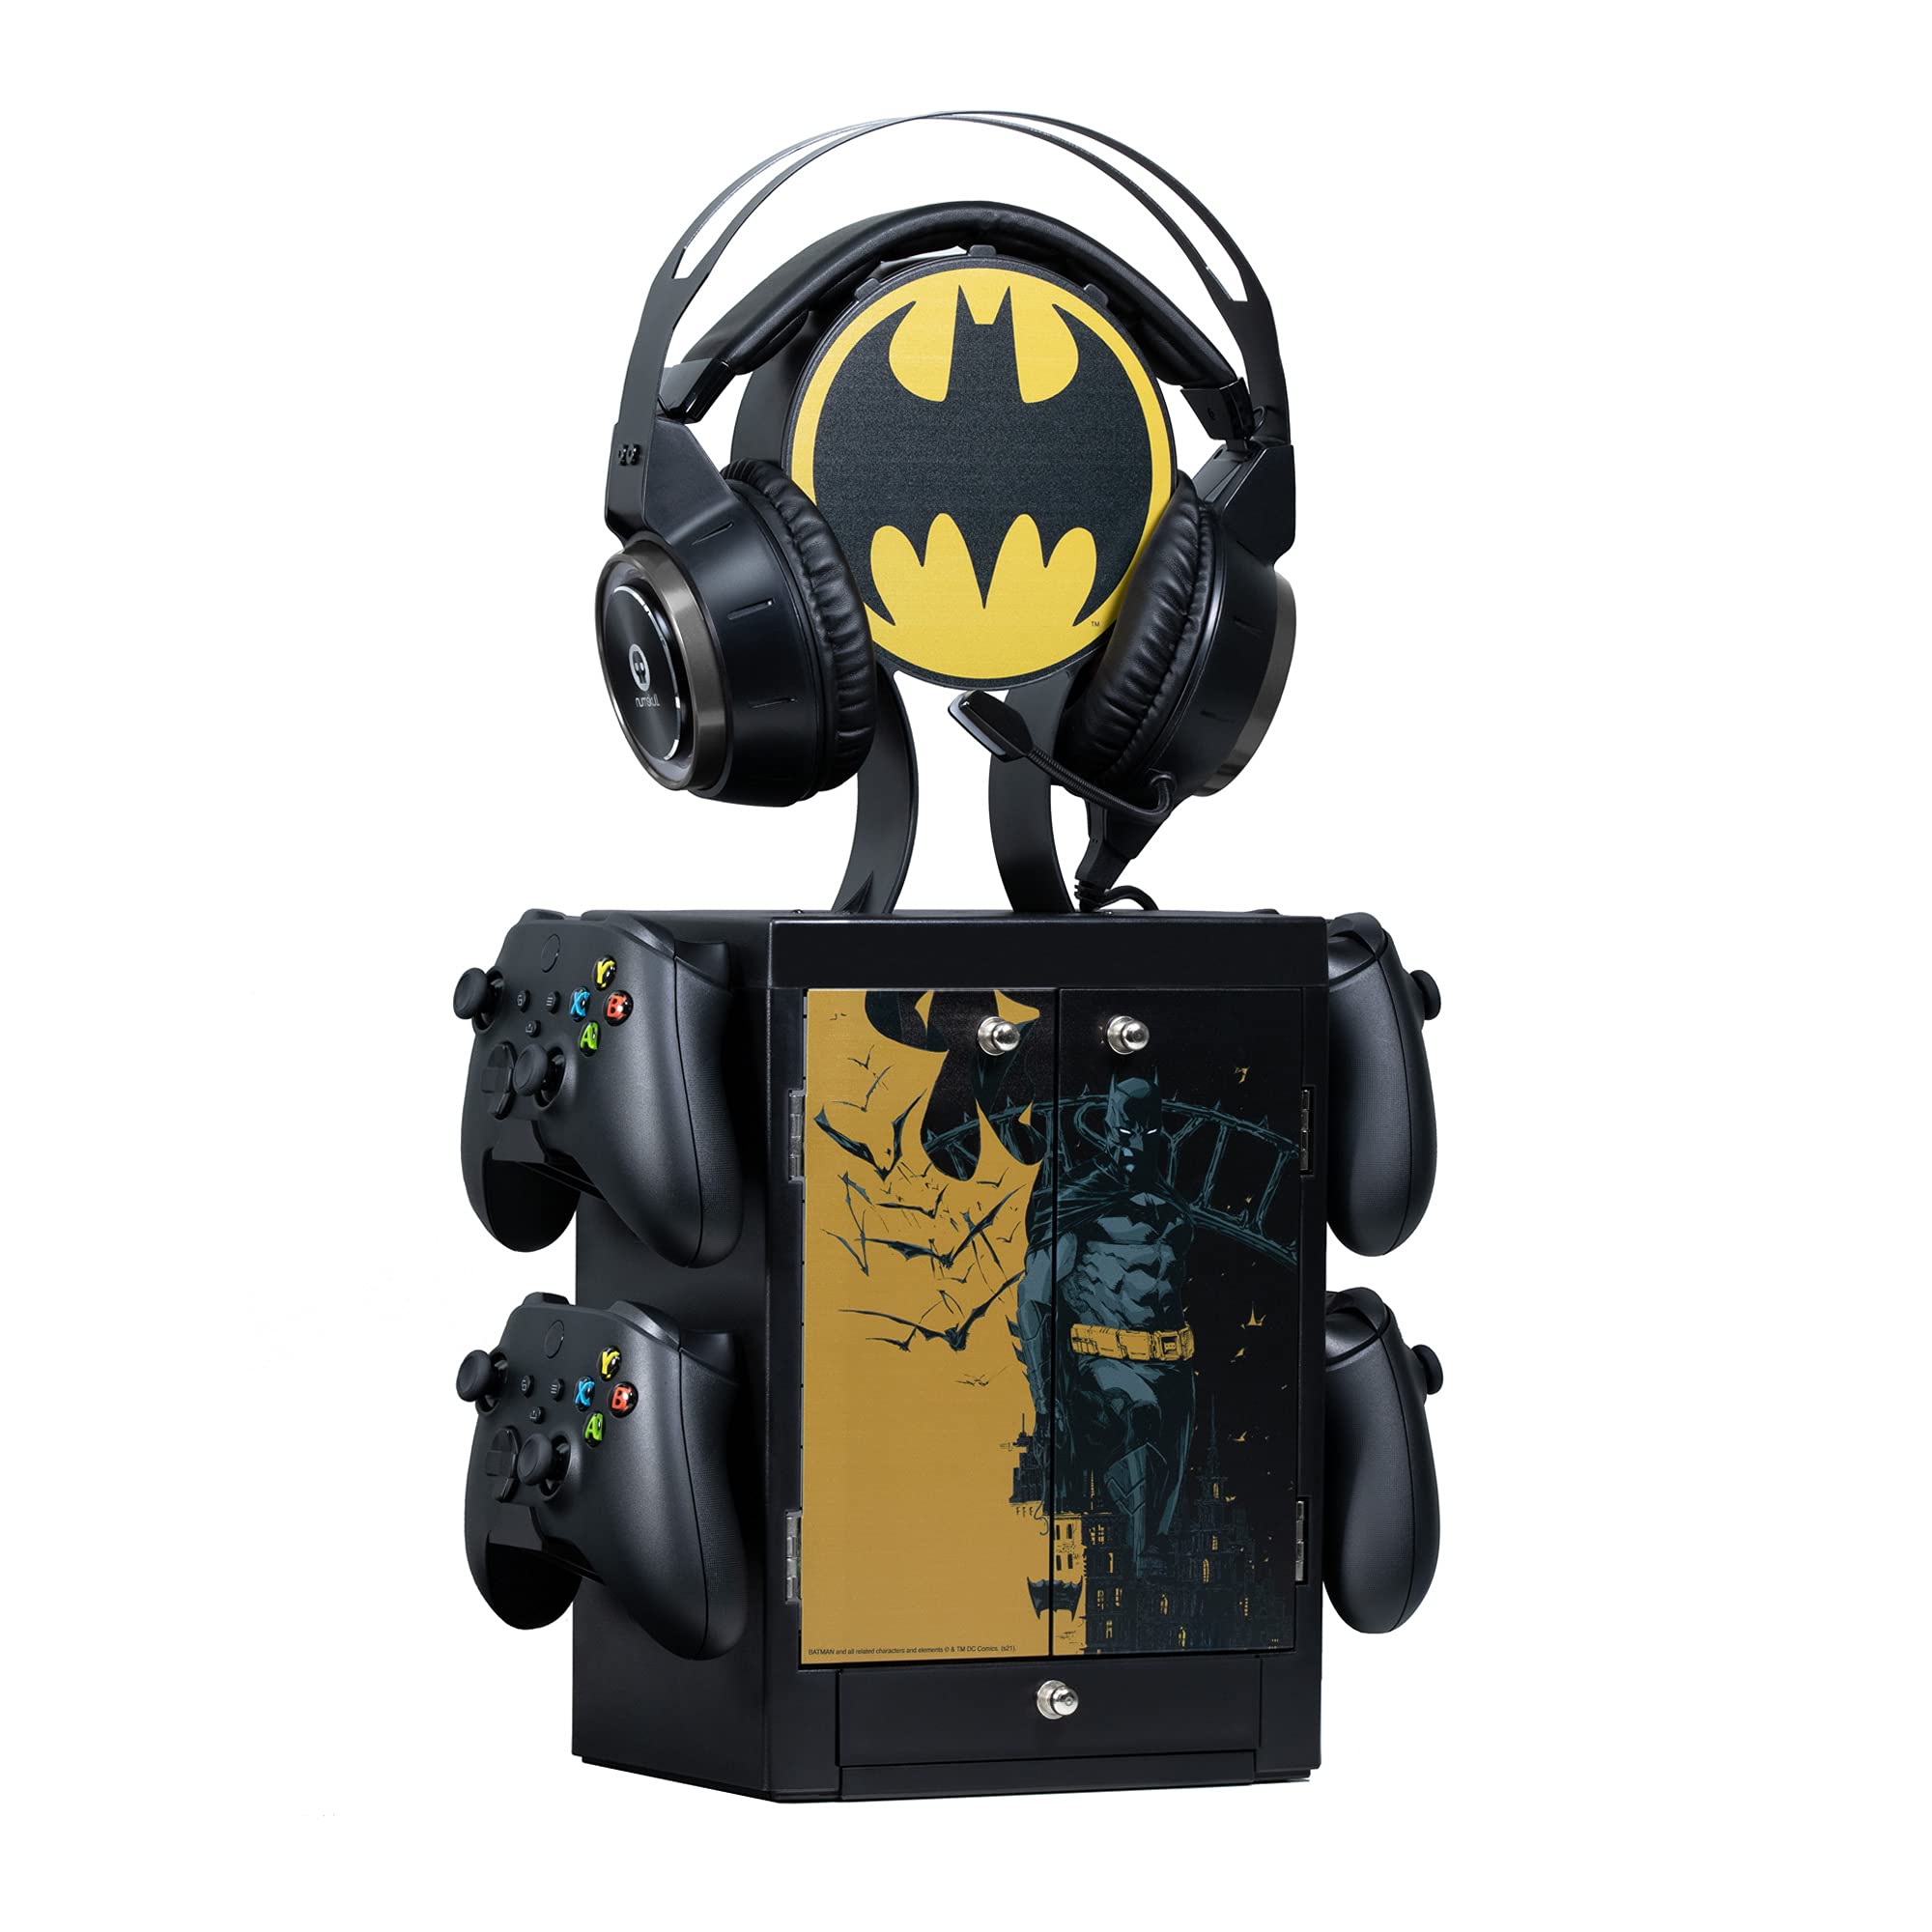 Numskull Official Batman Game Storage Tower, Controller Holder, Headset Stand for PS4, Xbox One, Nintendo Switch - Official Halo Merchandise (Xbox Series X/)